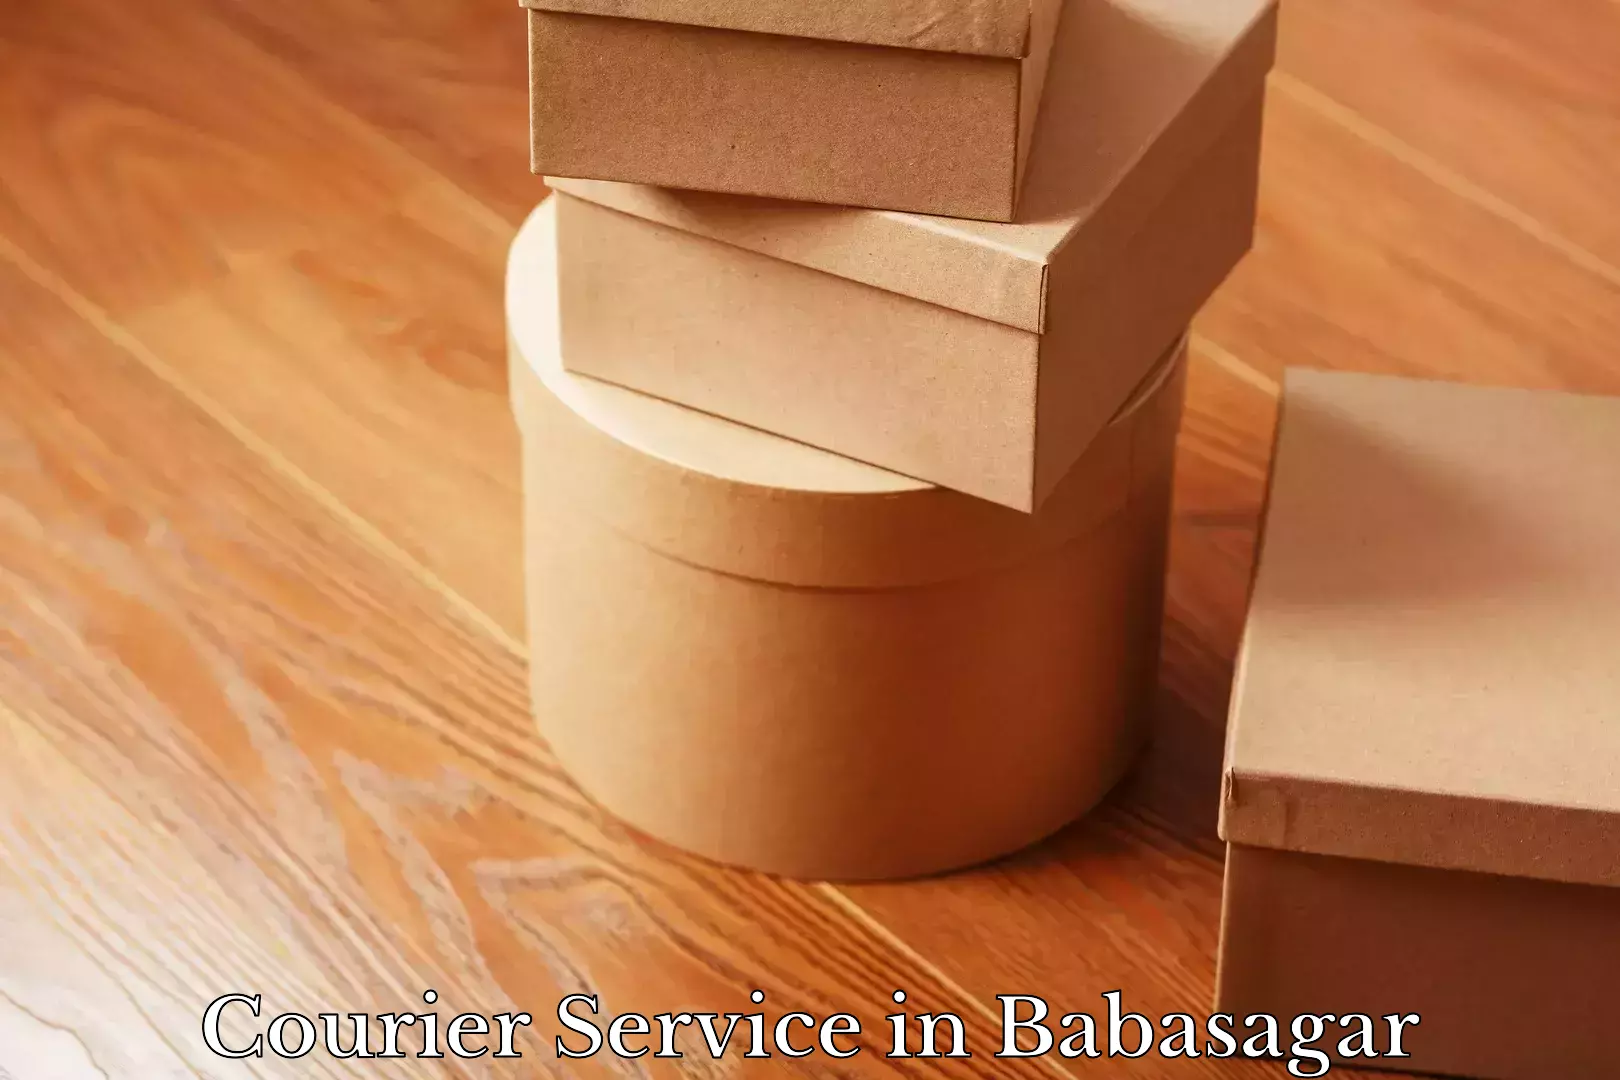 Tailored shipping services in Babasagar